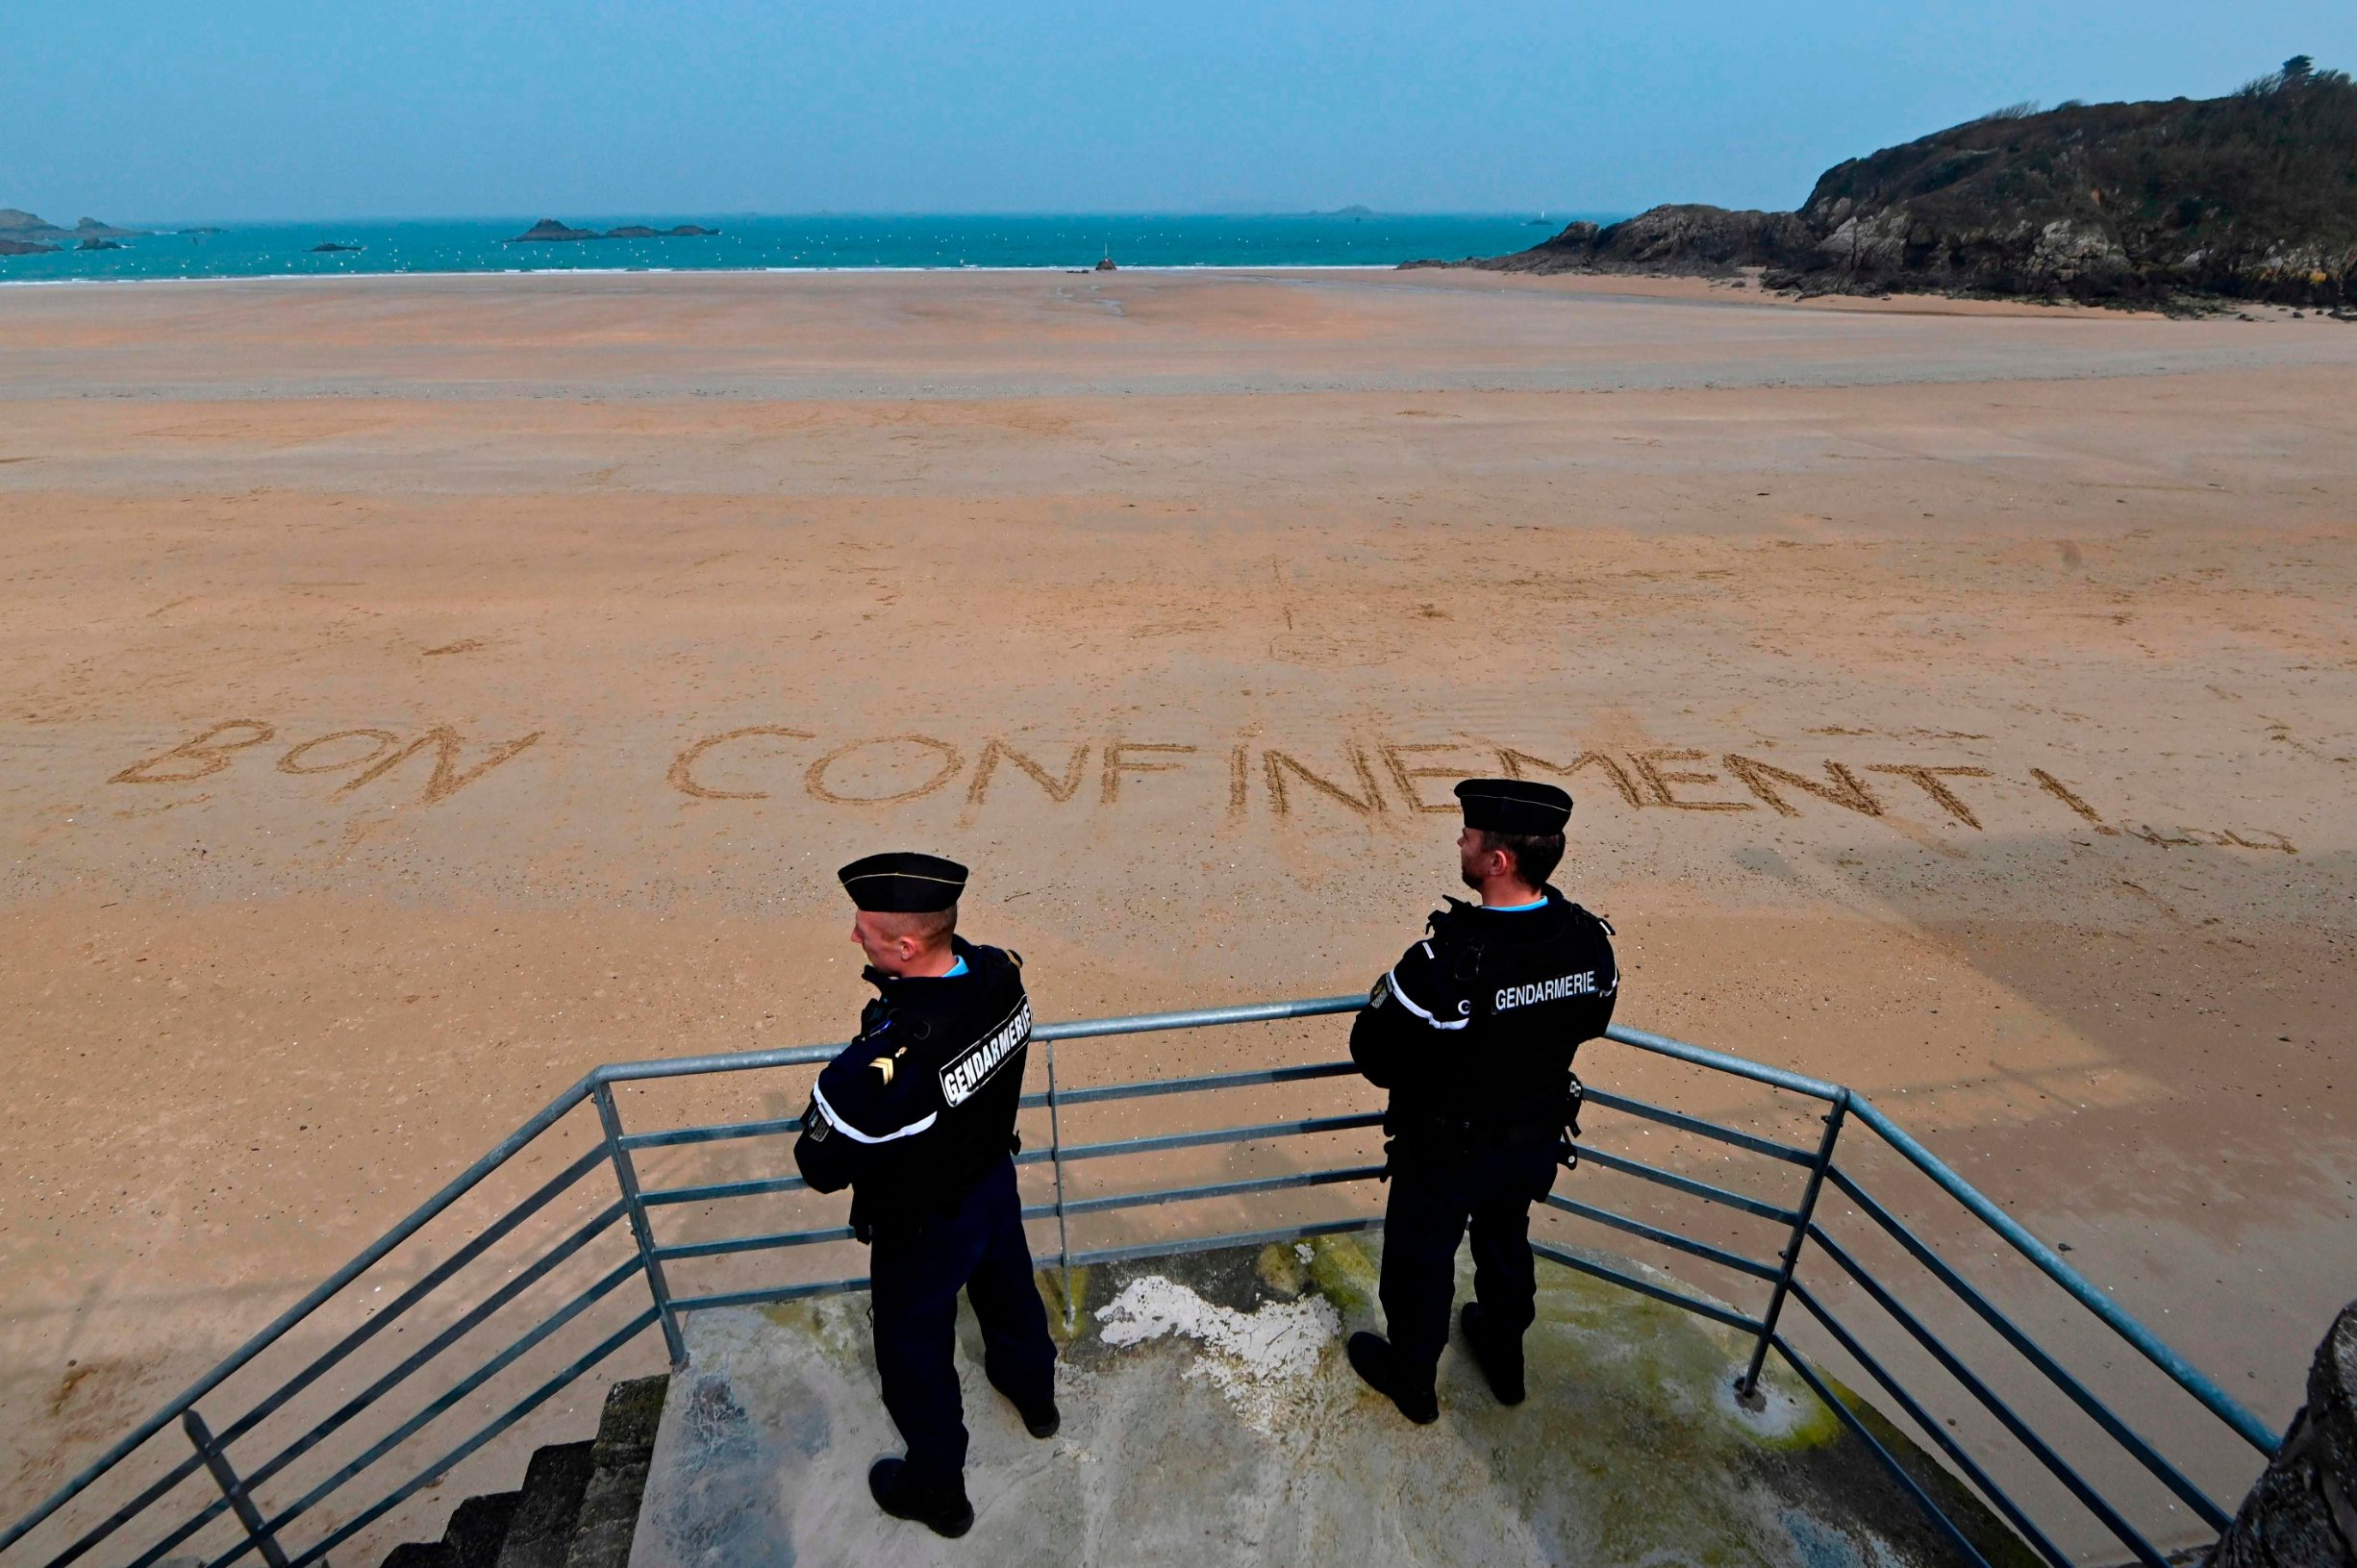 French gendarmes patrol on an empty beach with a message written on the sand, reading 'nice confinement' on March 20, 2020 in the western city of Saint-Lunaire,  on the fourth day of a strict lockdown in France to stop the spread of the novel coronavirus (COVID-19). (Photo by Damien Meyer / AFP)